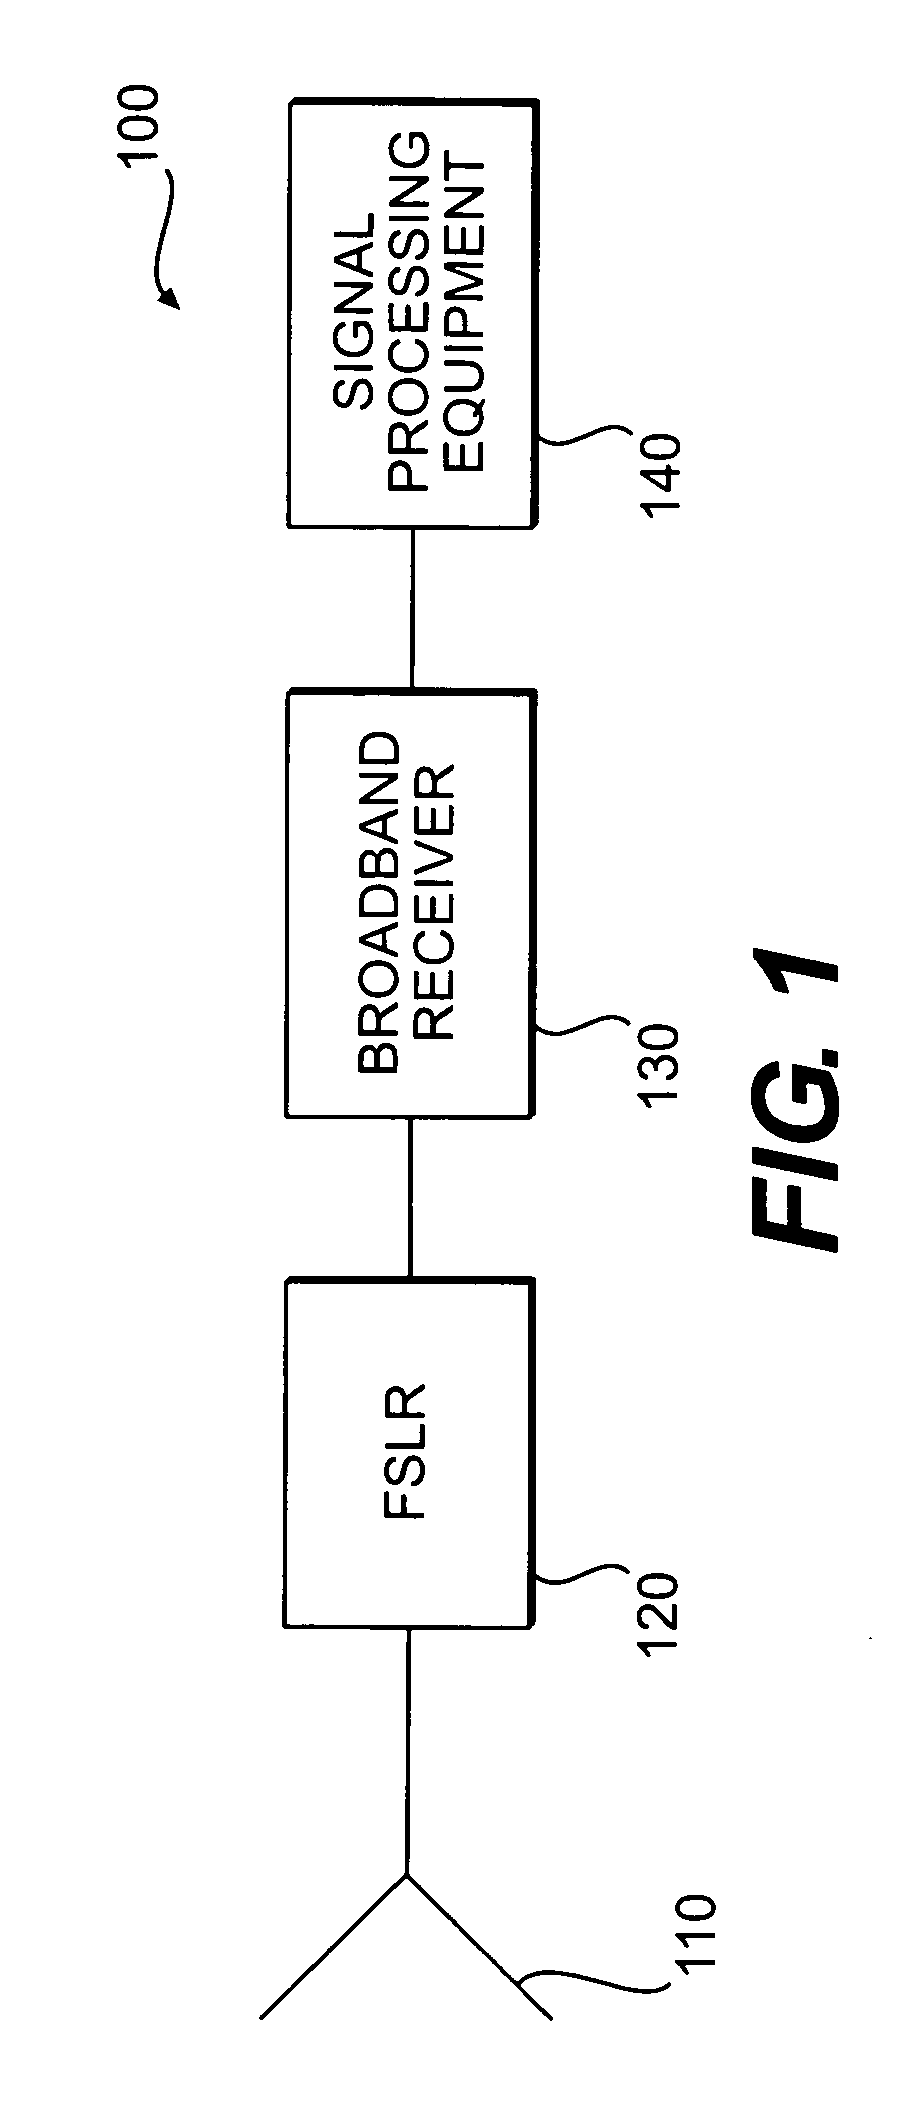 Frequency selective limiting with resonators